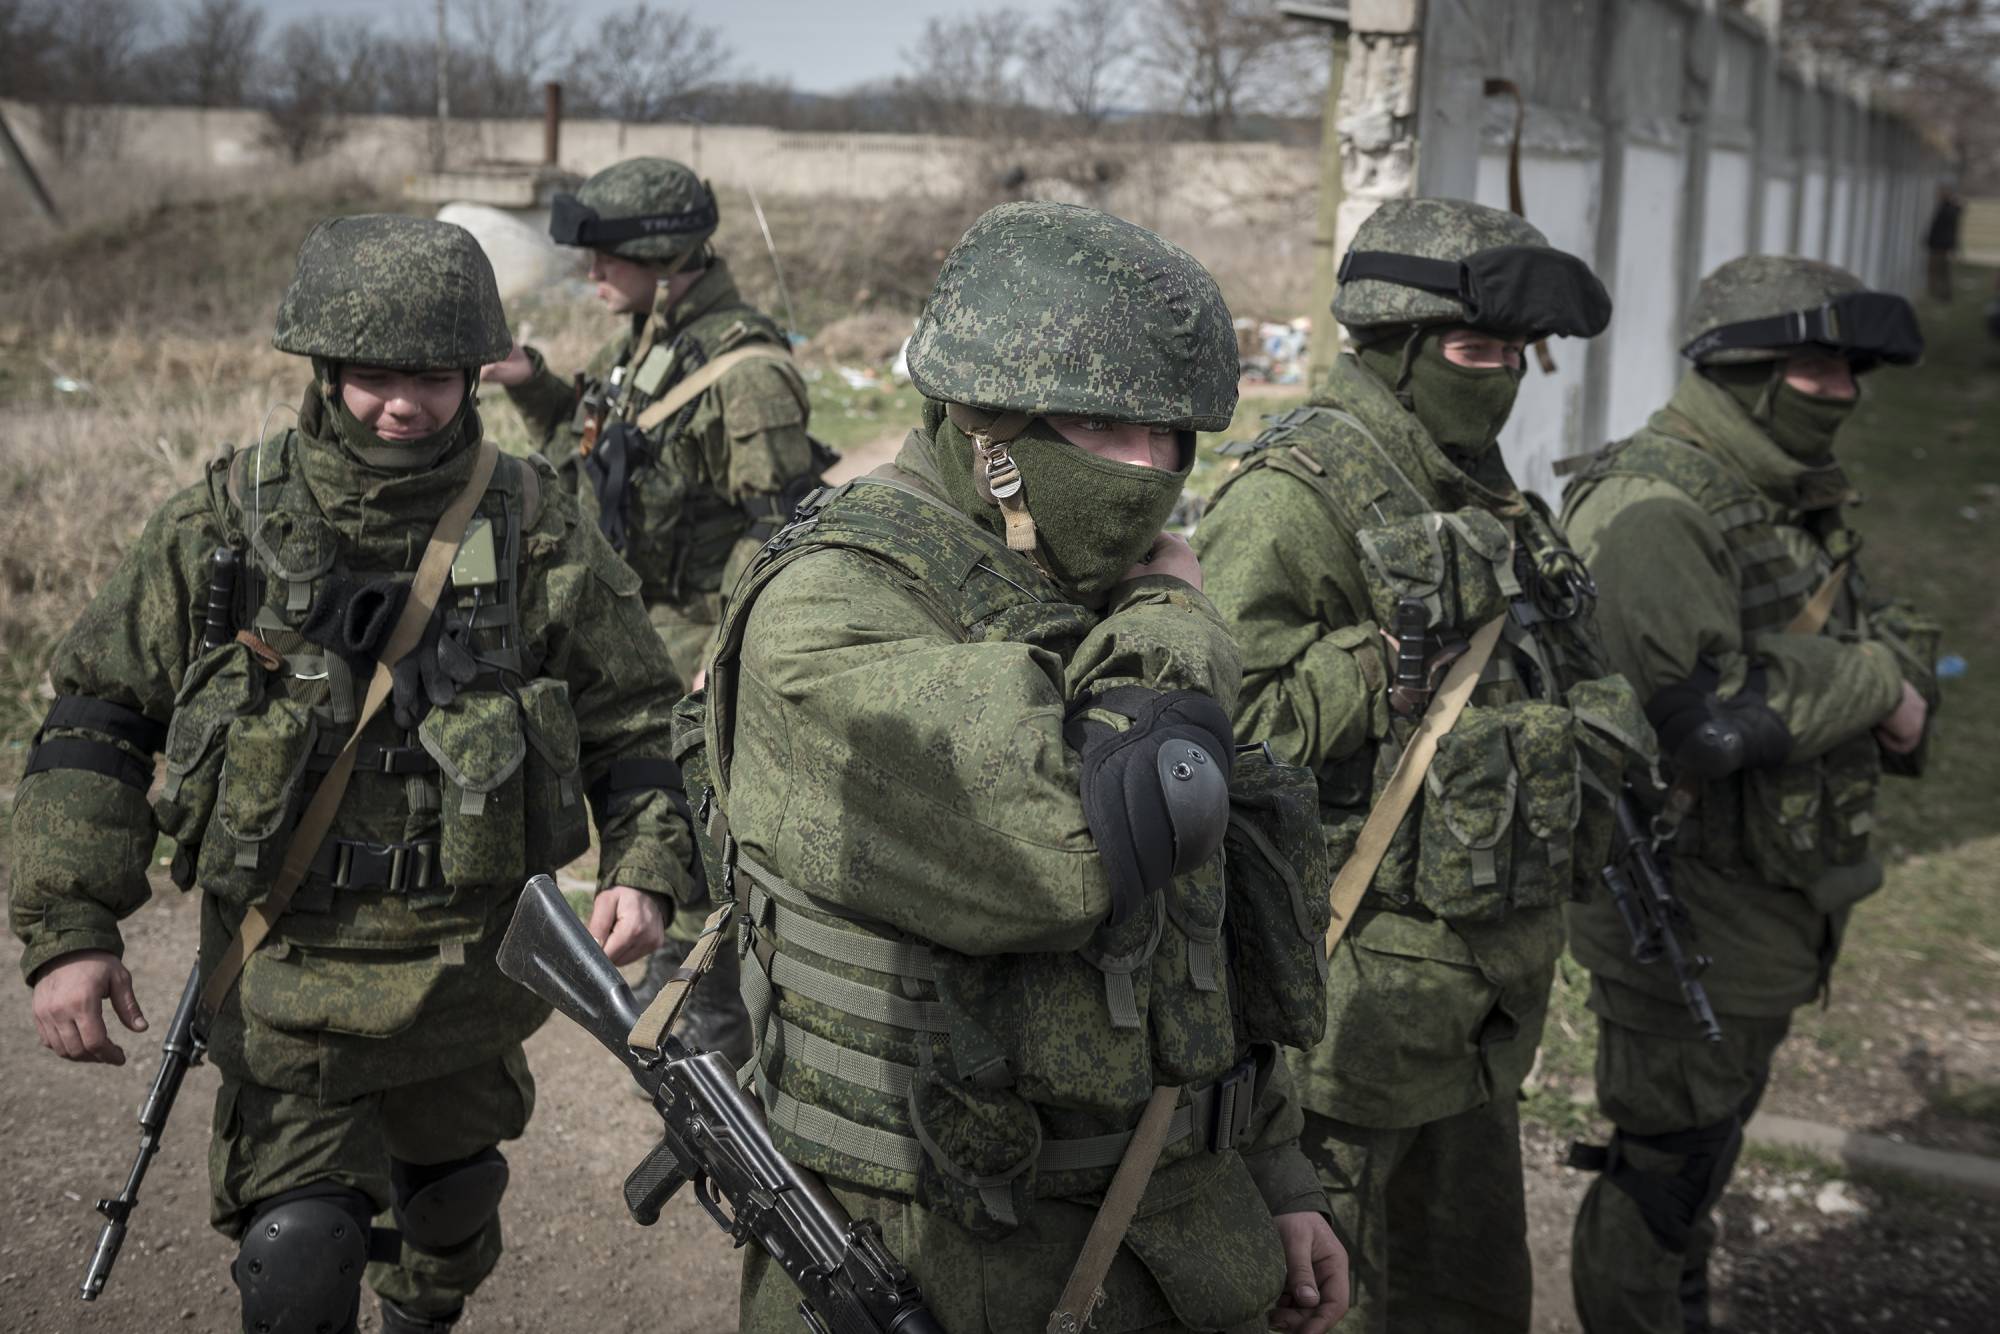 FILE -- Unidentified soldiers in Crimea, March 6, 2014. Russia has amassed more troops on the Ukrainian border than at any time since 2014. Western governments are asking: Why now? (Sergey Ponomarev/The New York Times)